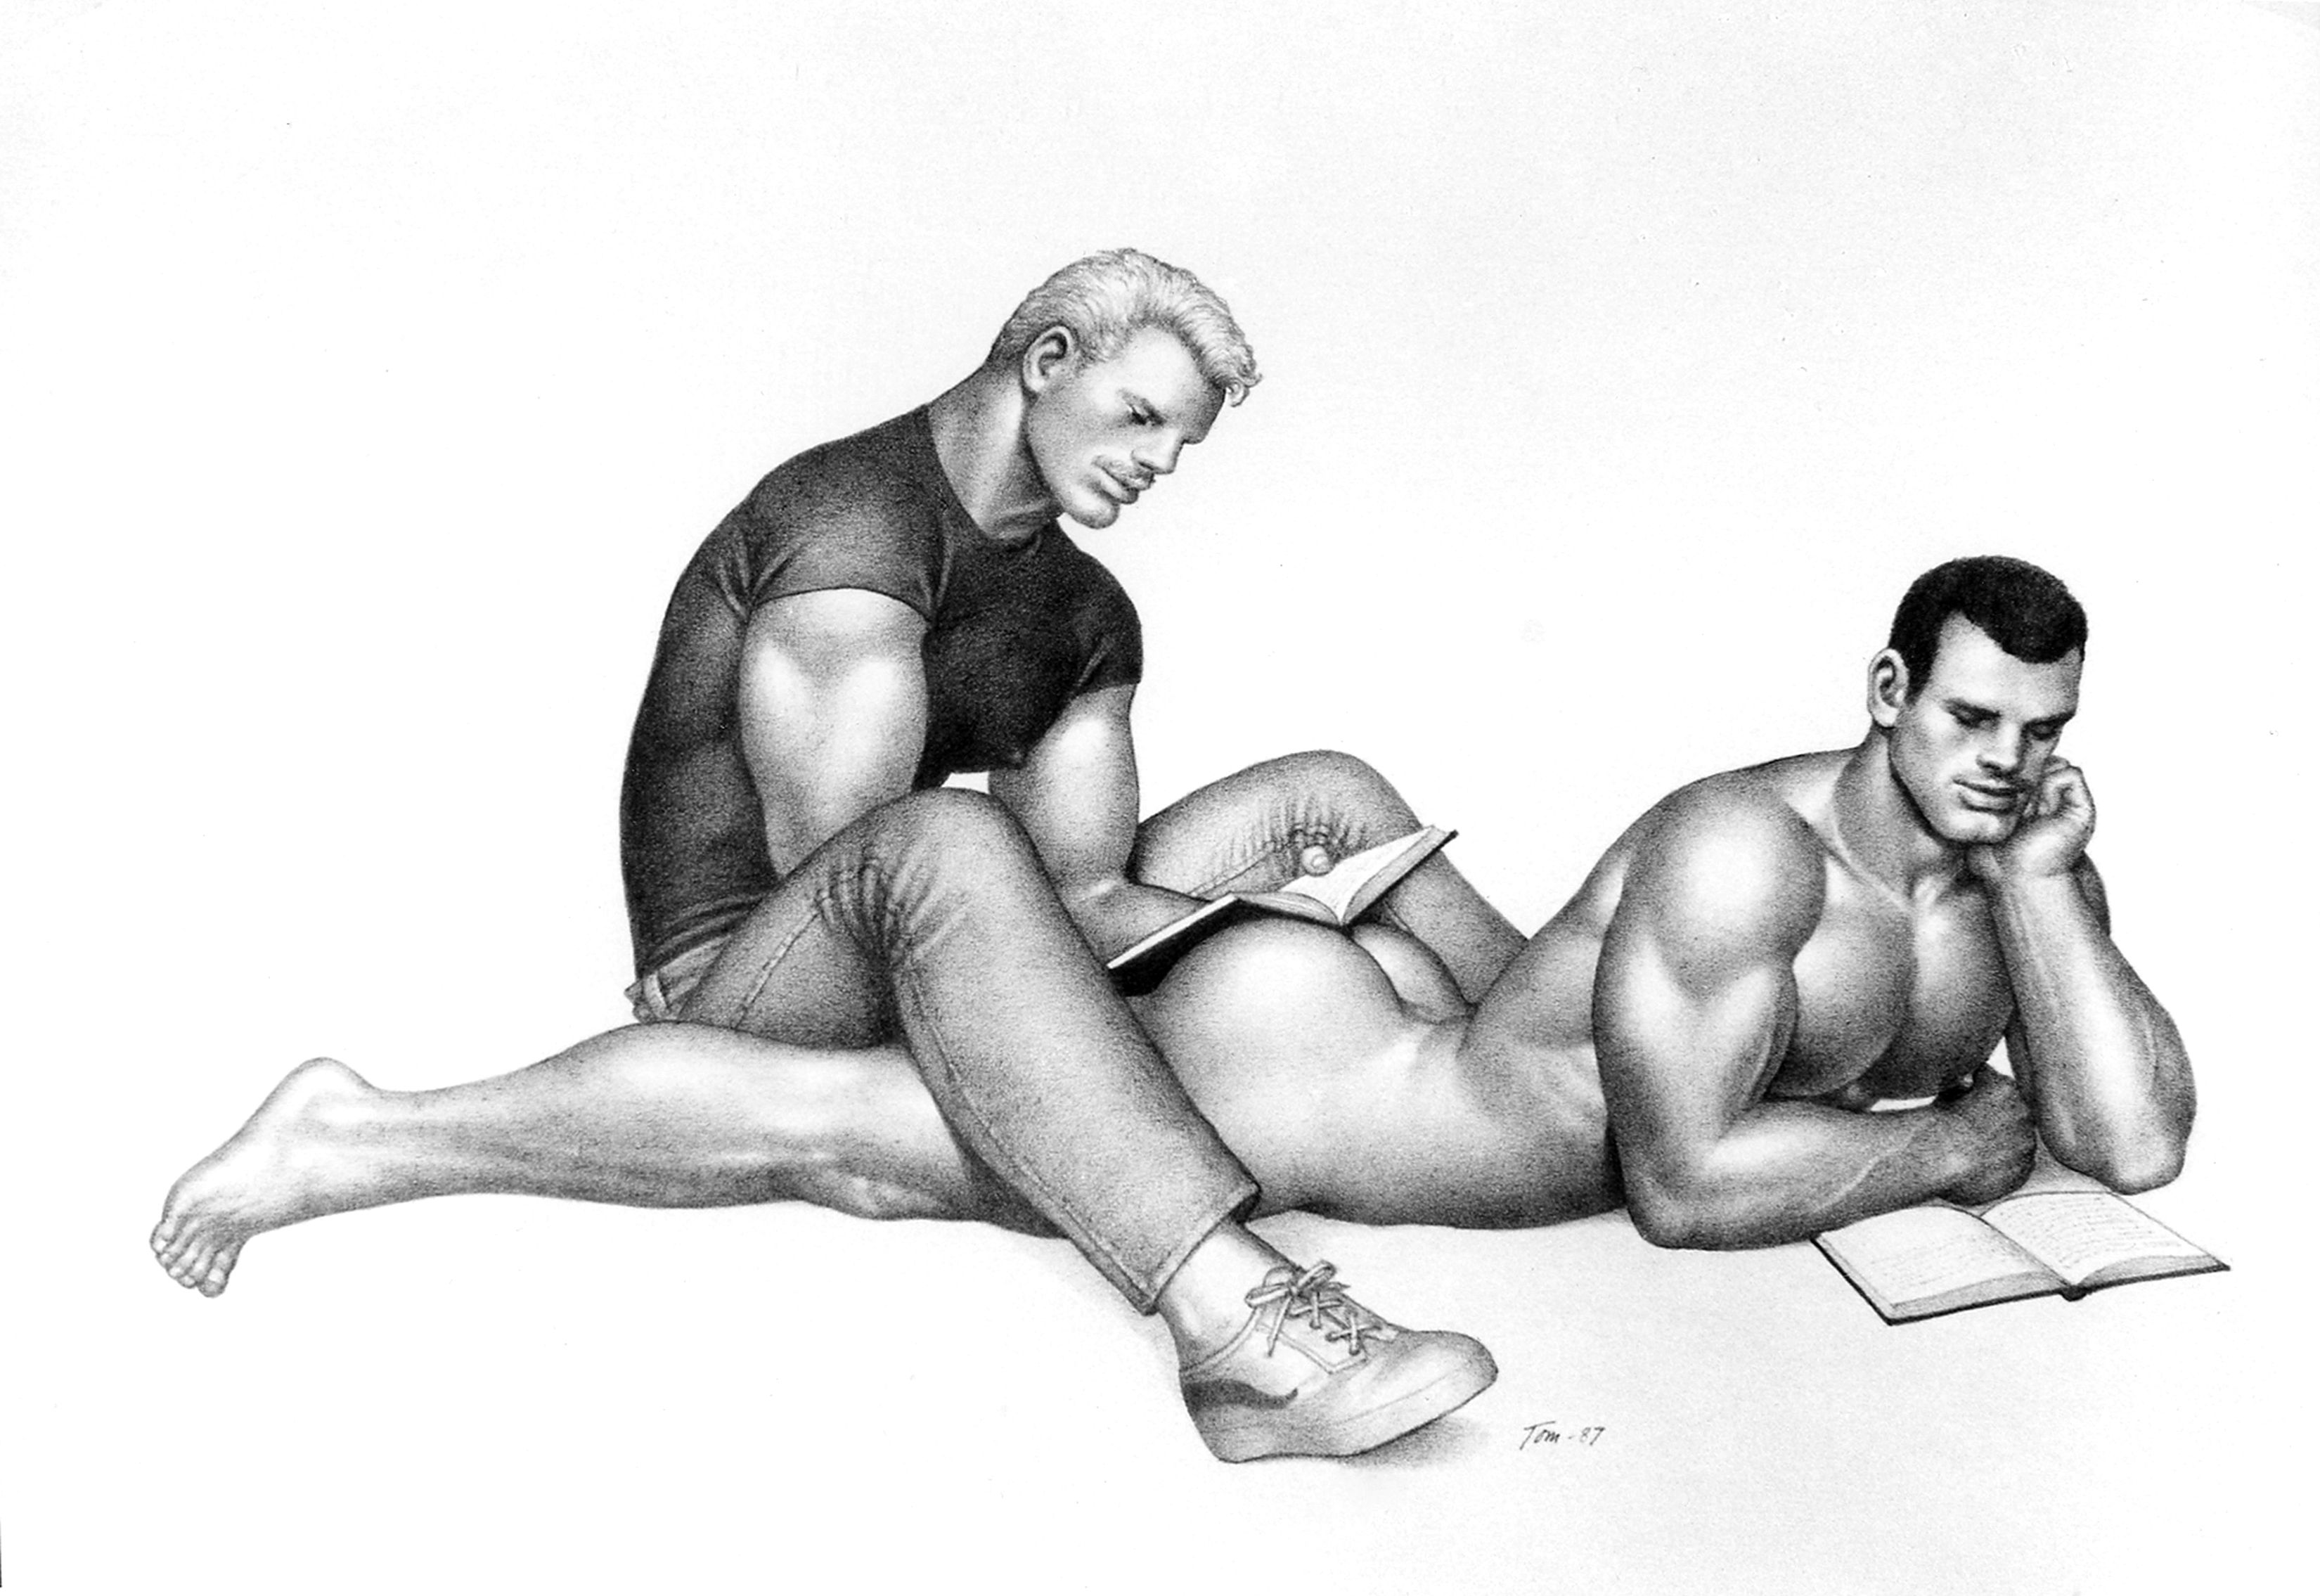 1960s Gay Male Porn - There's A Gay Tom Of Finland Porno Stashed In Your Wardrobe